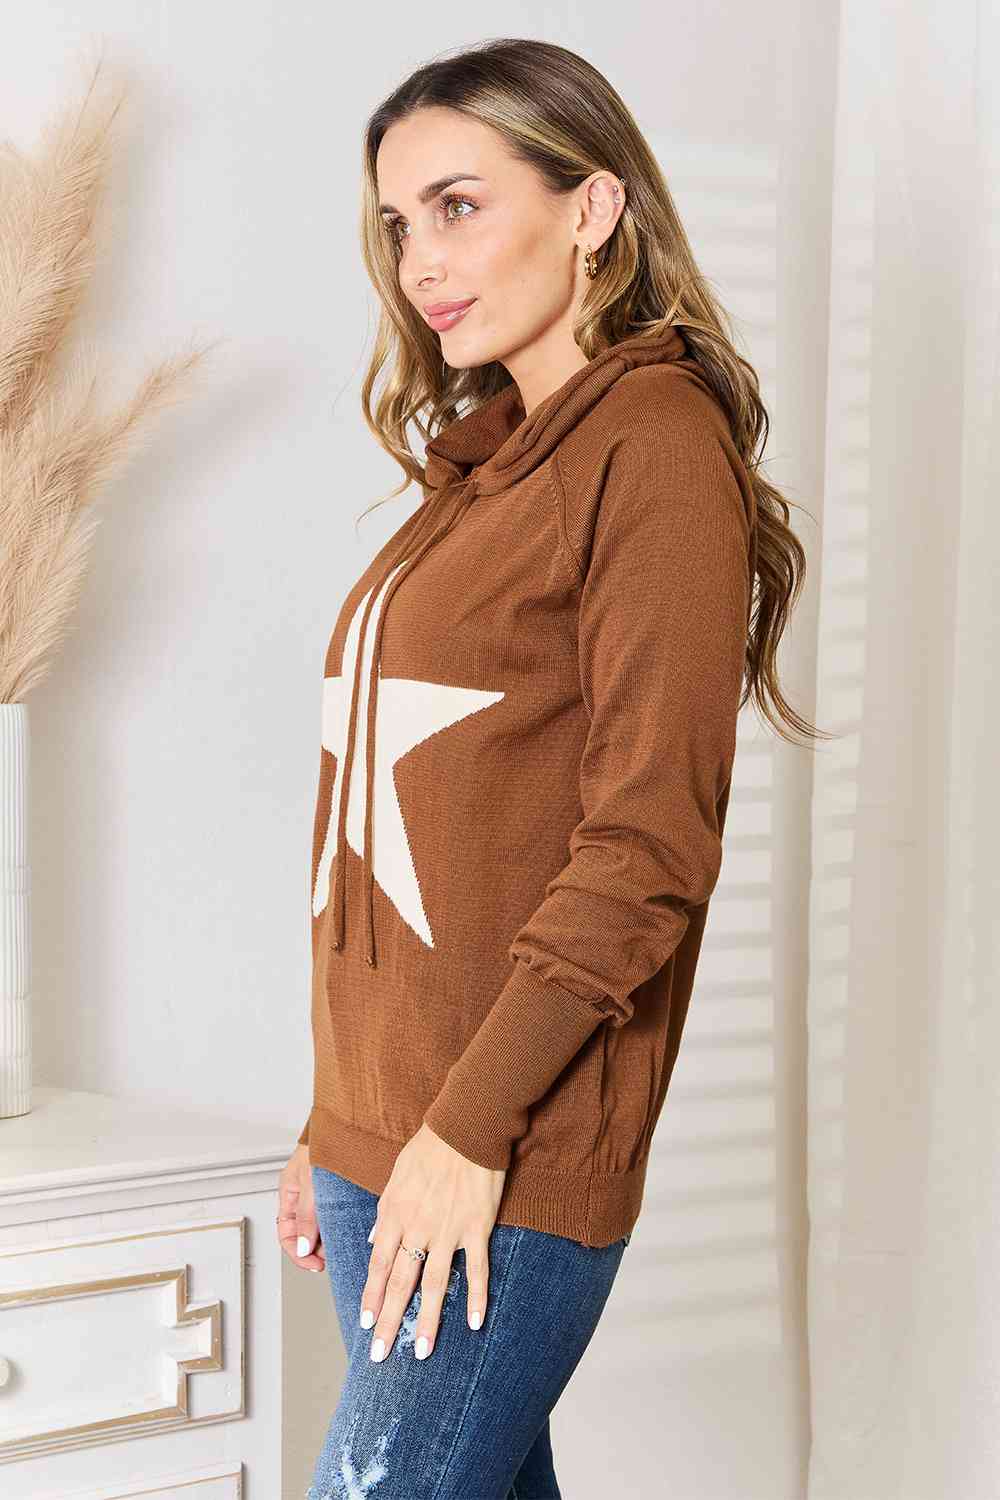 Heimish Full Size Star Graphic Chestnut Brown Hooded Sweater